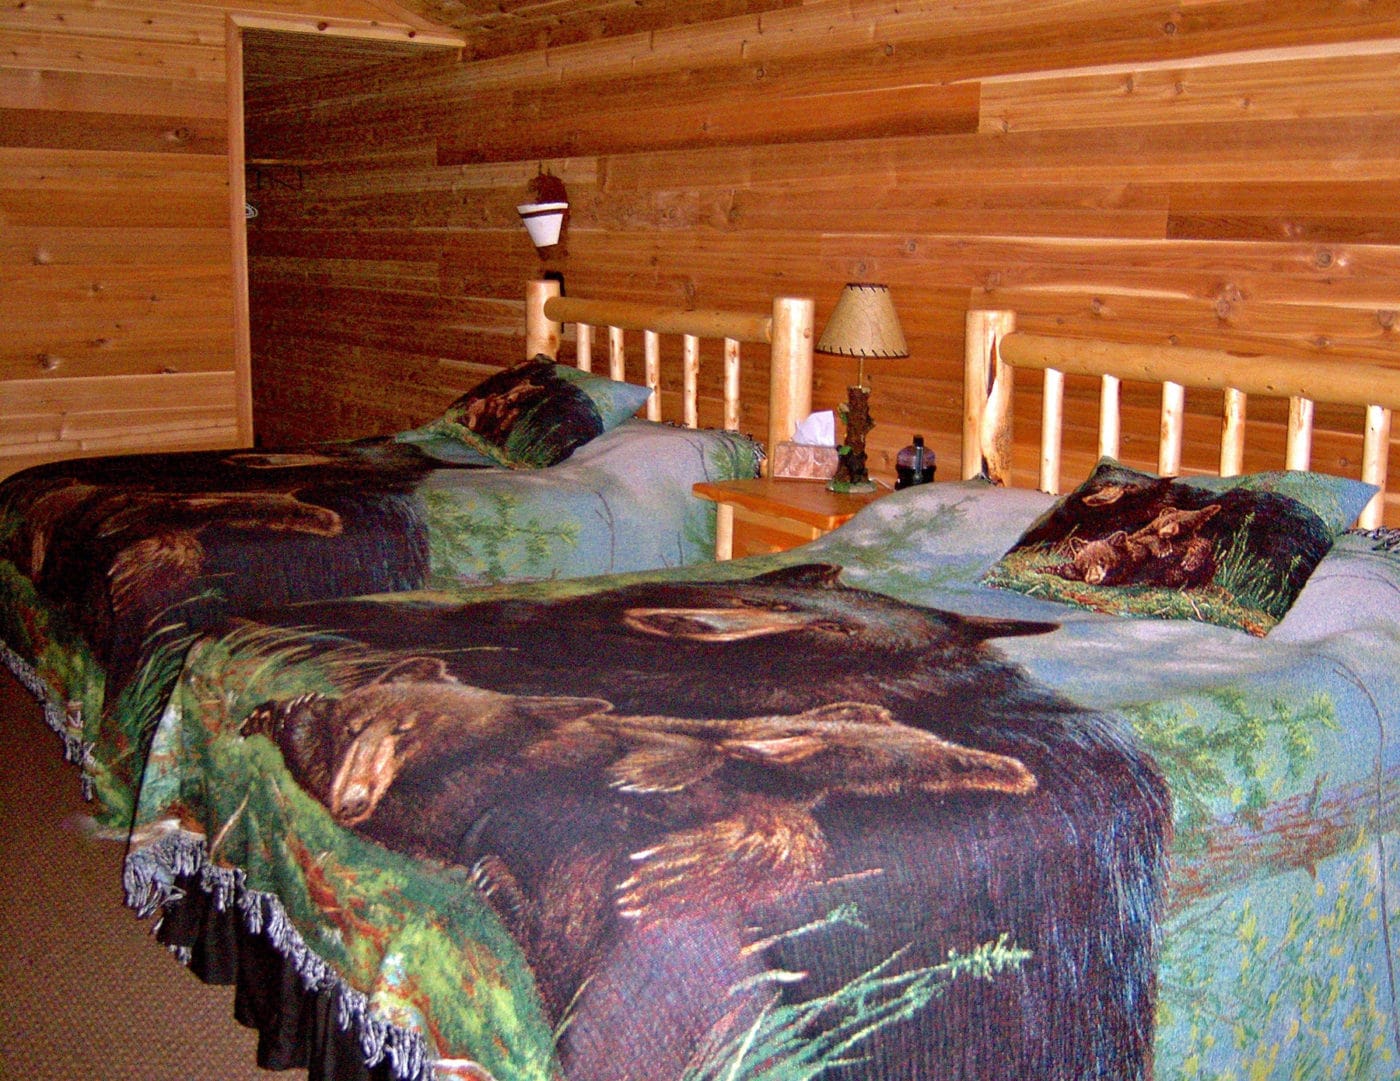 Guest room with double beds in a black bear theme.